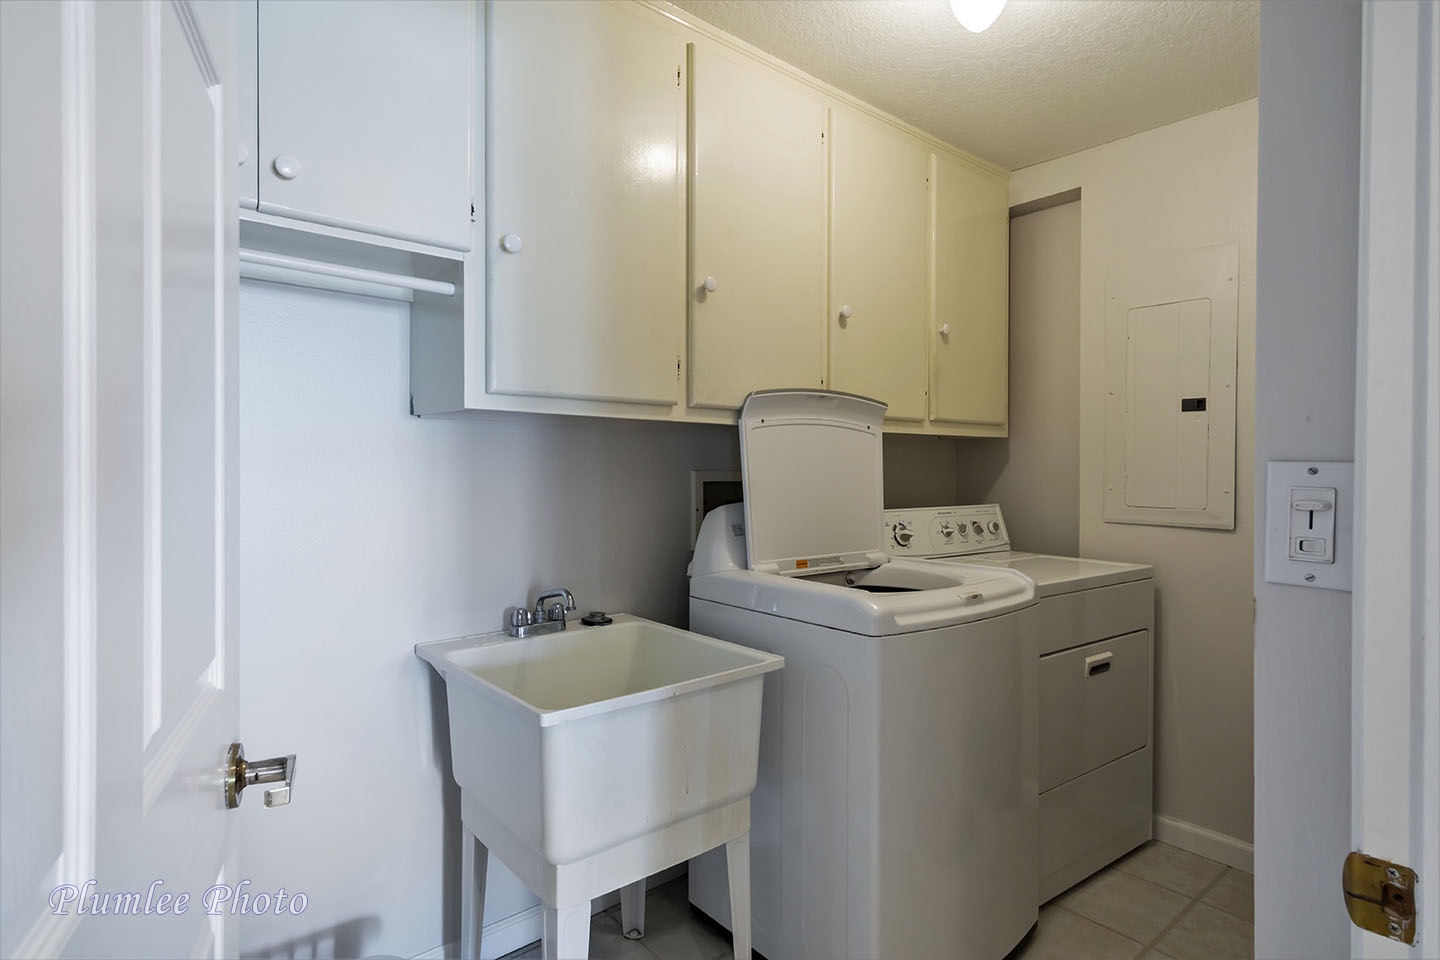 The laundry room is off the kitchen.